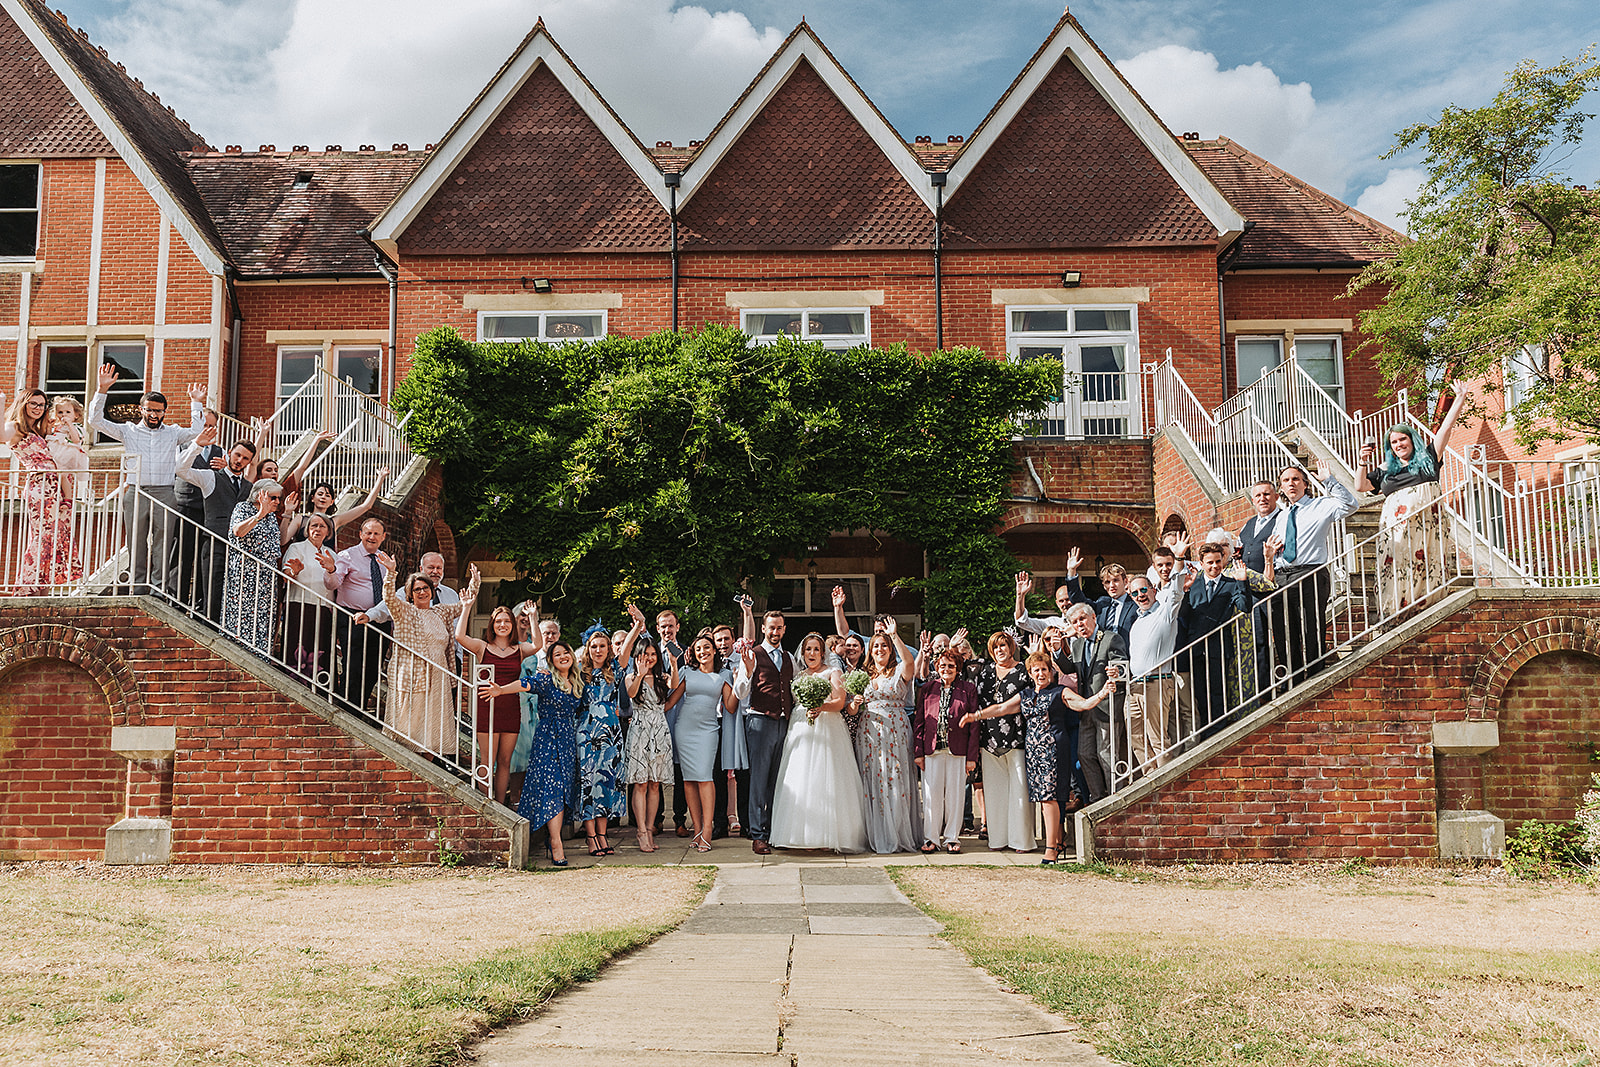 Family photo smiling at Pendley Manor, Tring. Wedding Photo by Perfect Memories photography